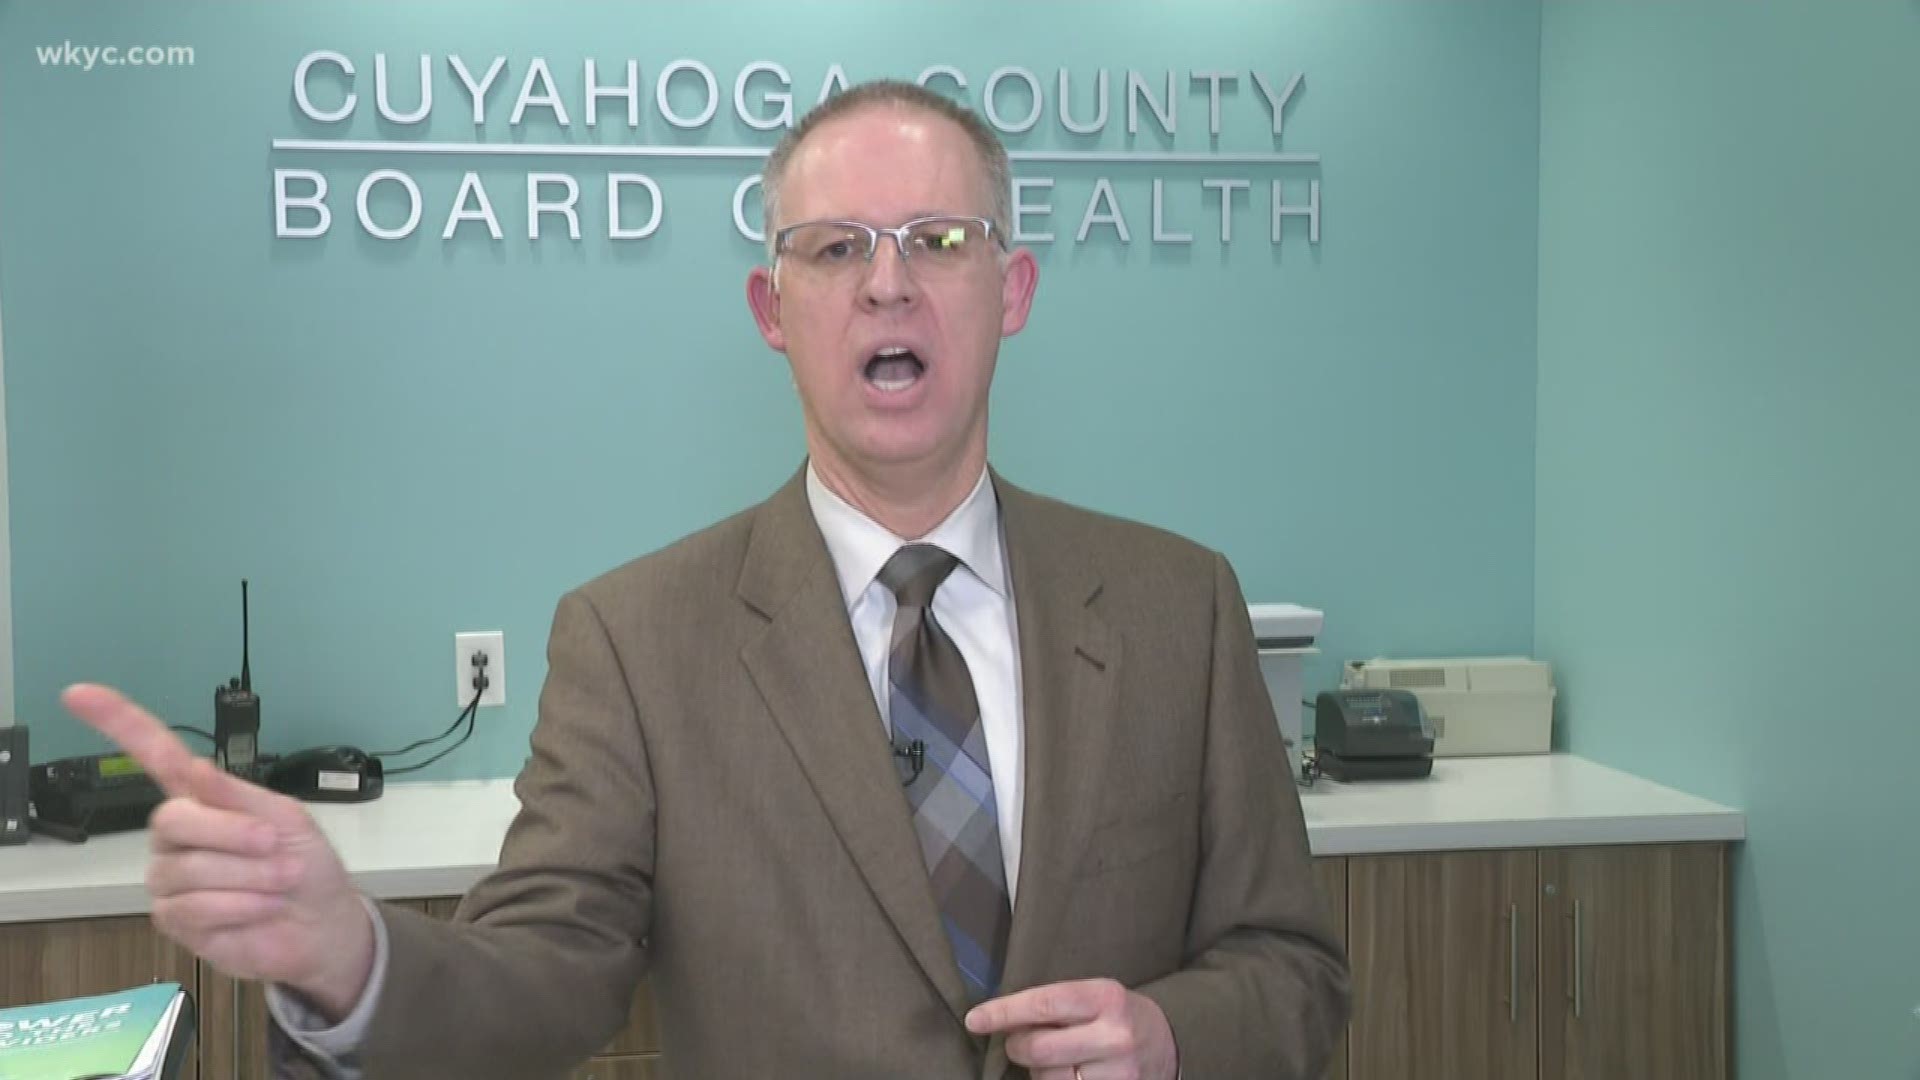 Cuyahoga County Board of health official explains the timeline of coronavirus detection and treatment. Here are the steps.